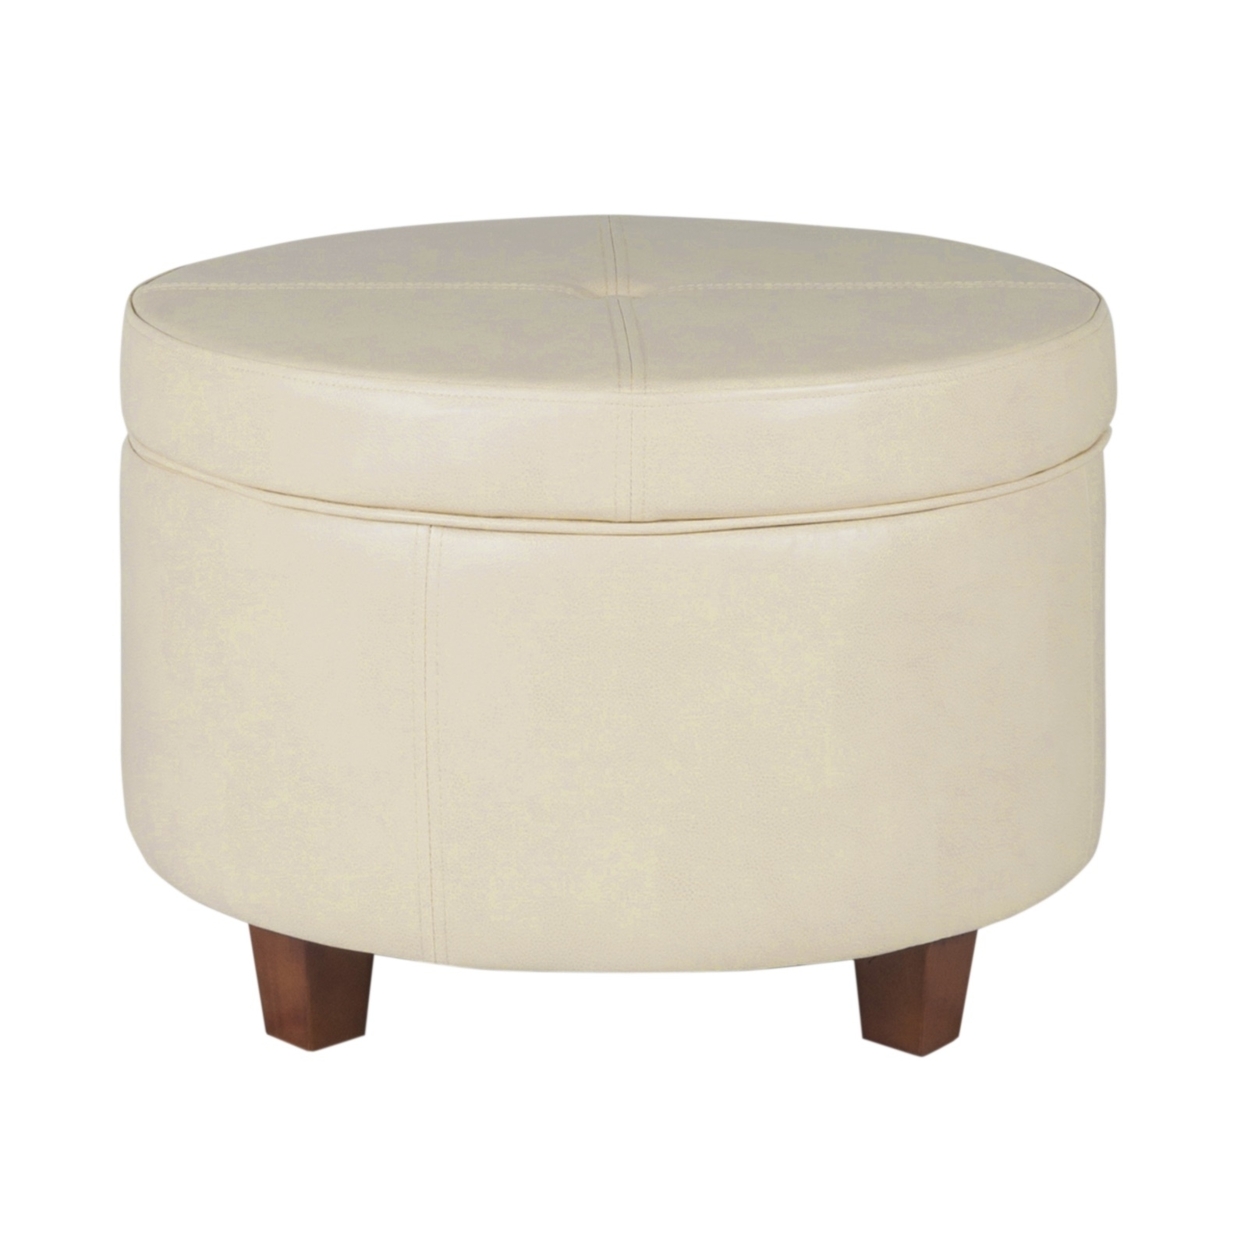 Leatherette Upholstered Wooden Ottoman With Single Button Tufted Lift Top Storage, Cream, Large- Saltoro Sherpi